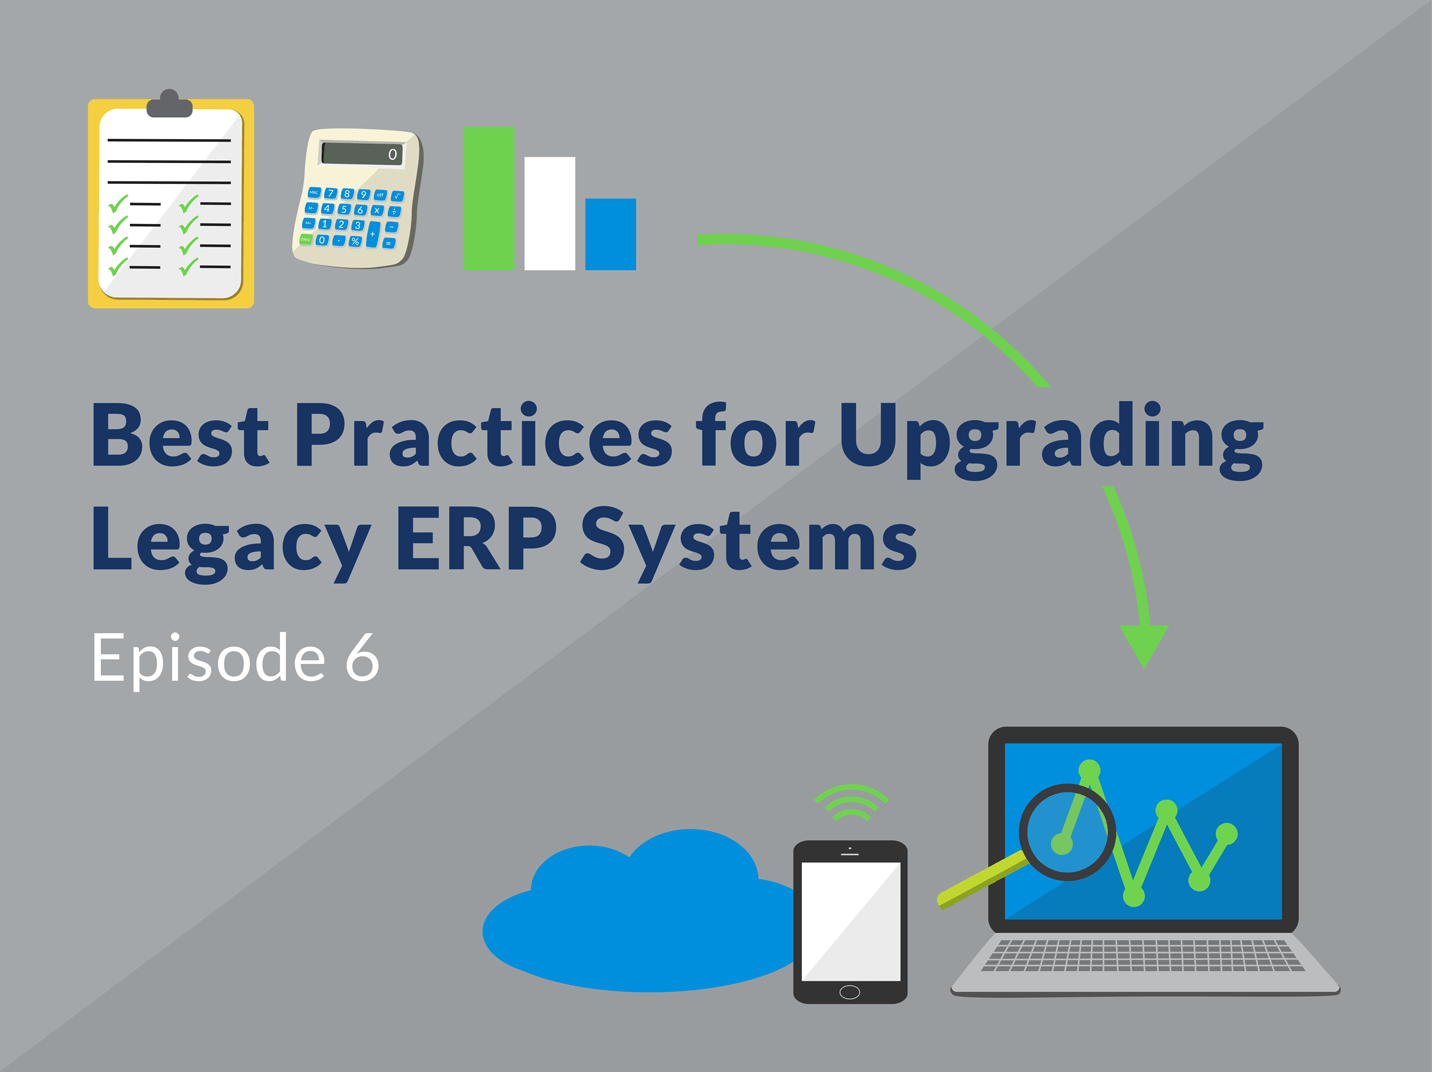 Best Practices for Upgrading Legacy ERP Systems